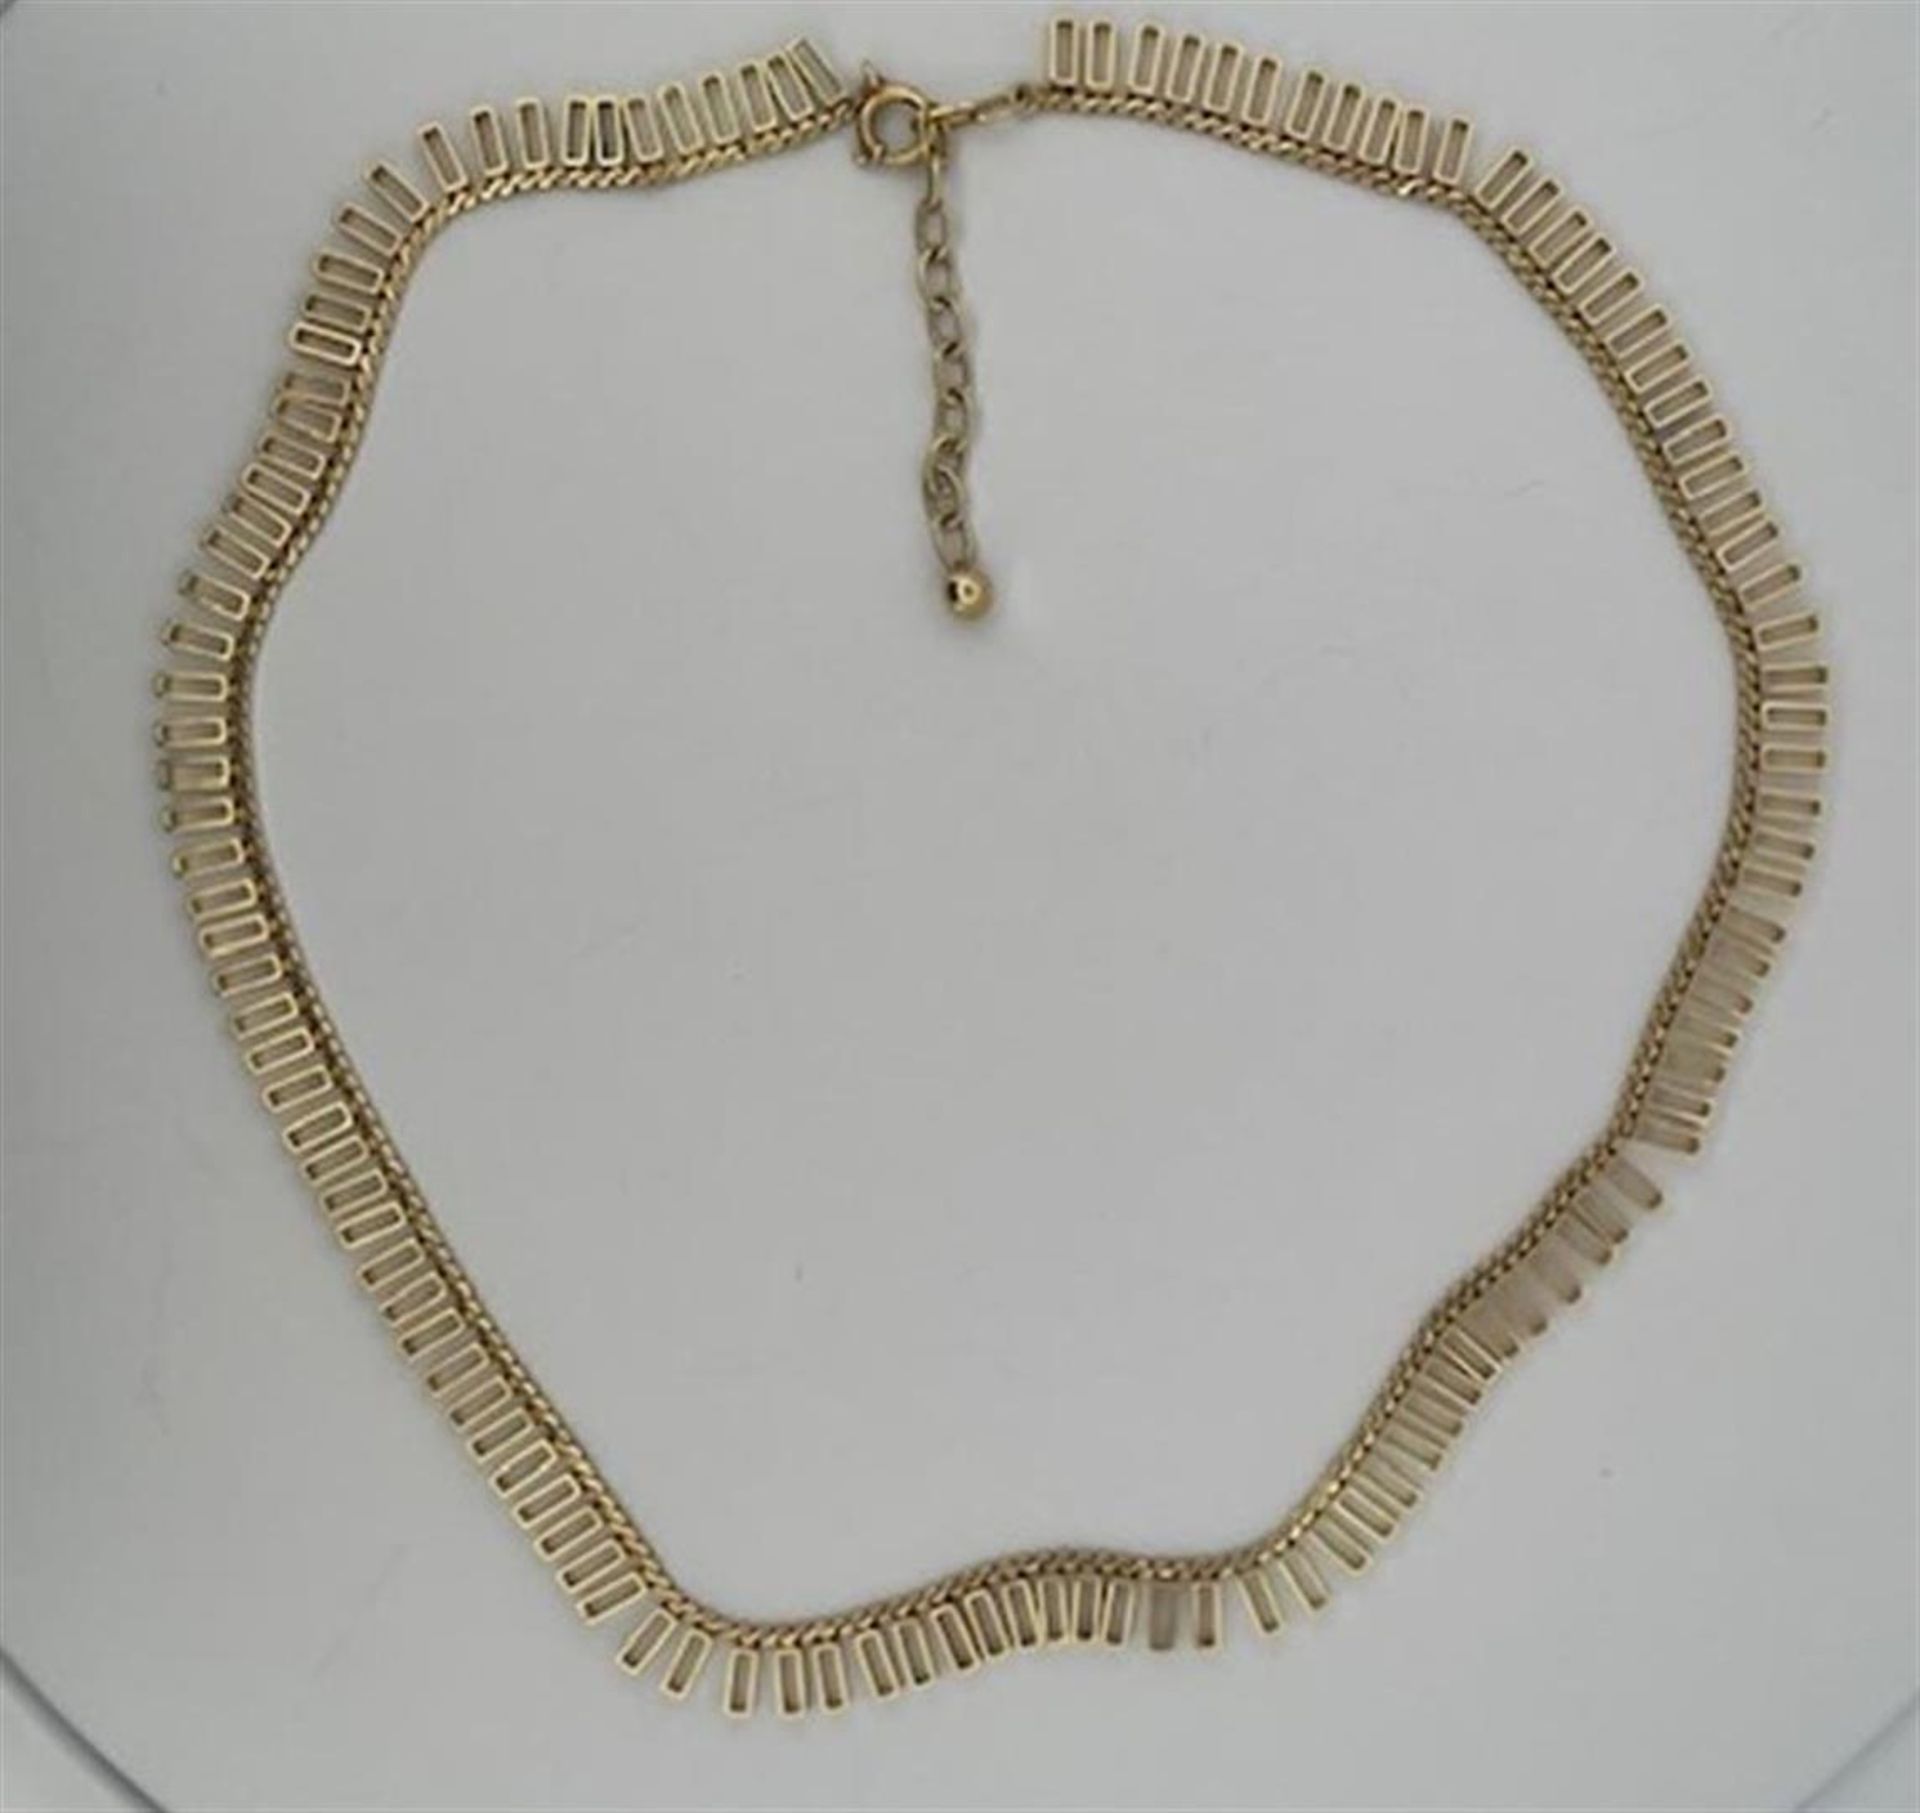 14kt S-shape link necklace with rectangular bars.
The necklace has a beautiful and elegant link with